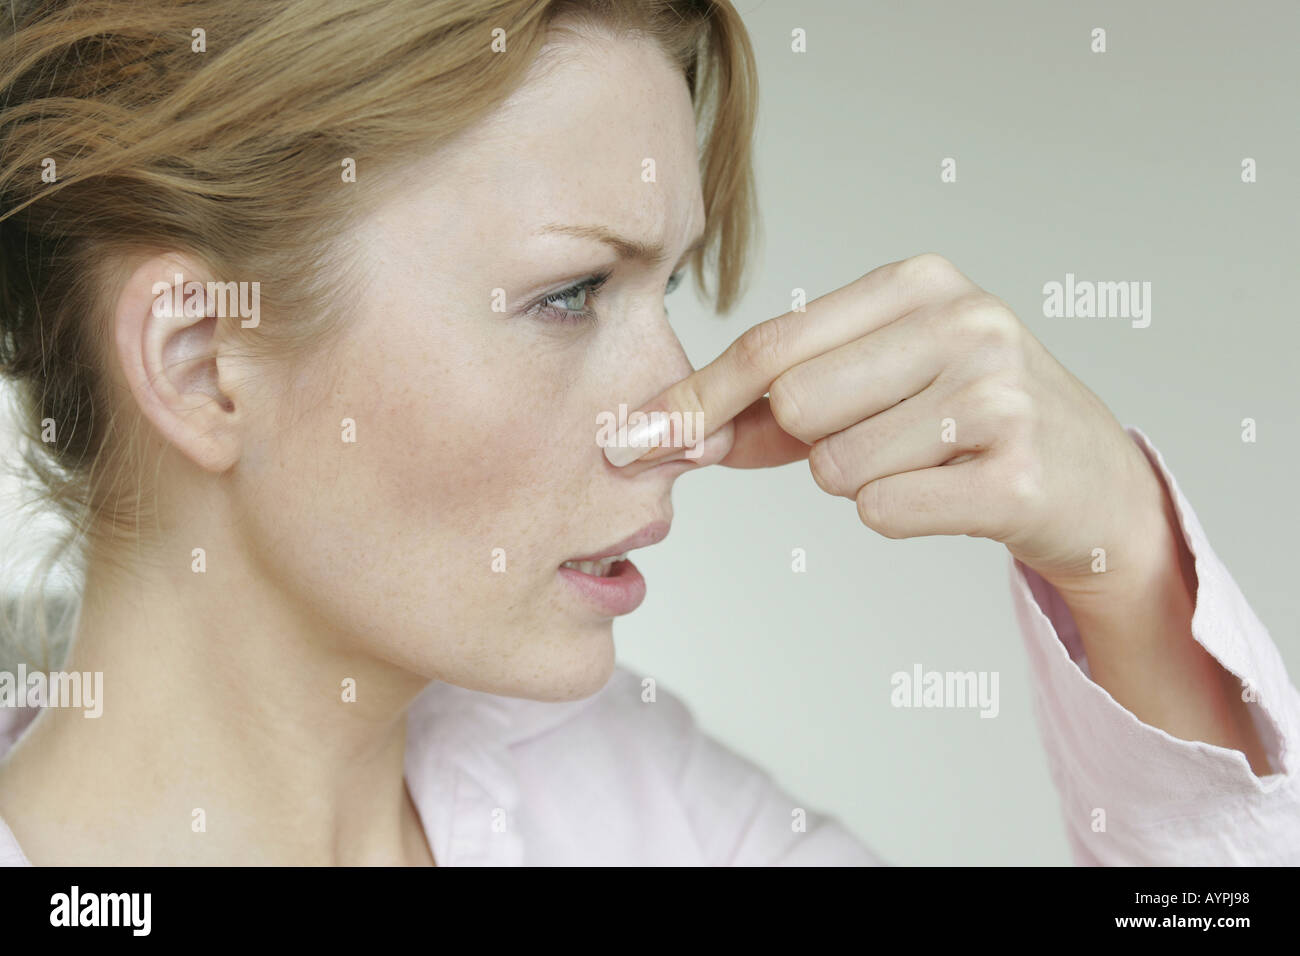 A woman closes her nose as something stinks near her Stock Photo